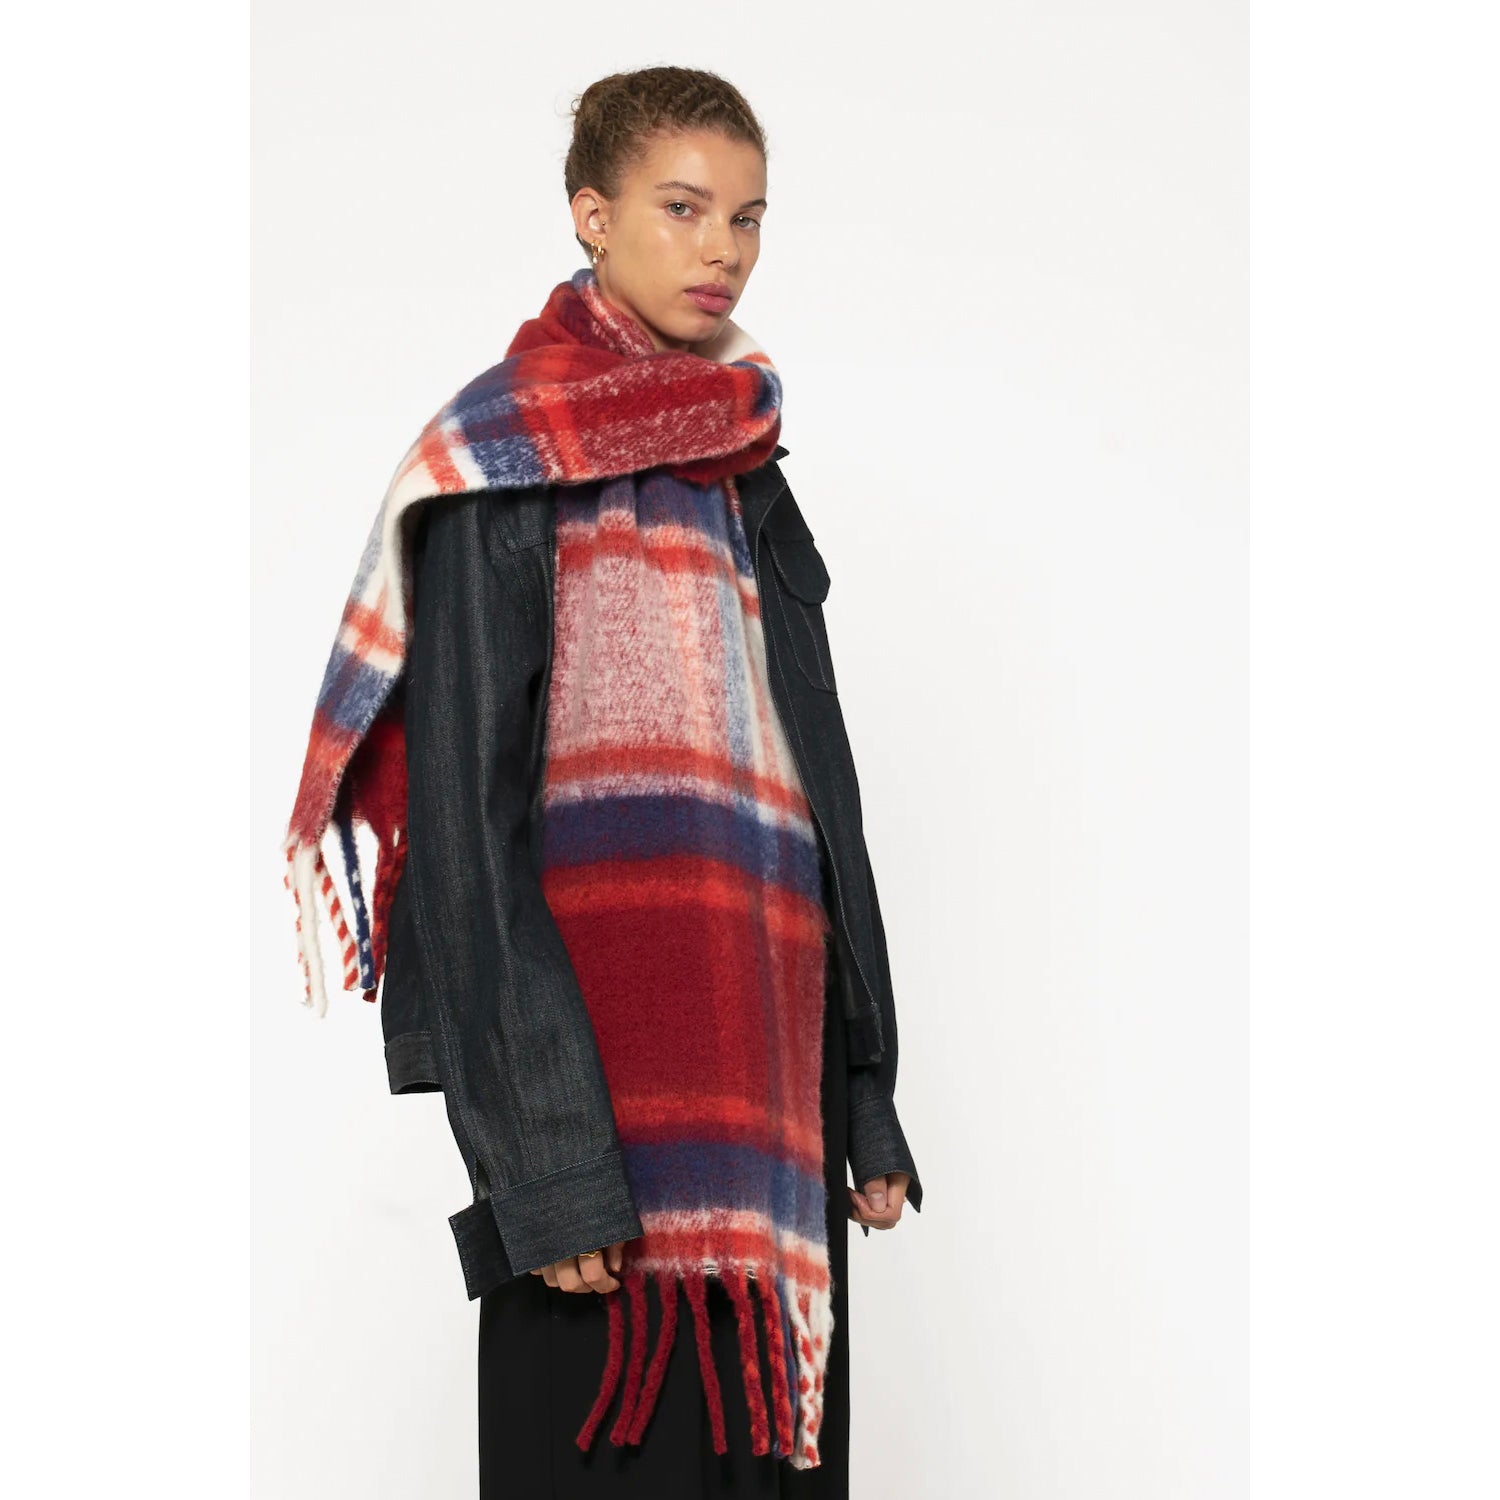 Product picture of REplaid Oversized Mohair Scarf - Red & Navy